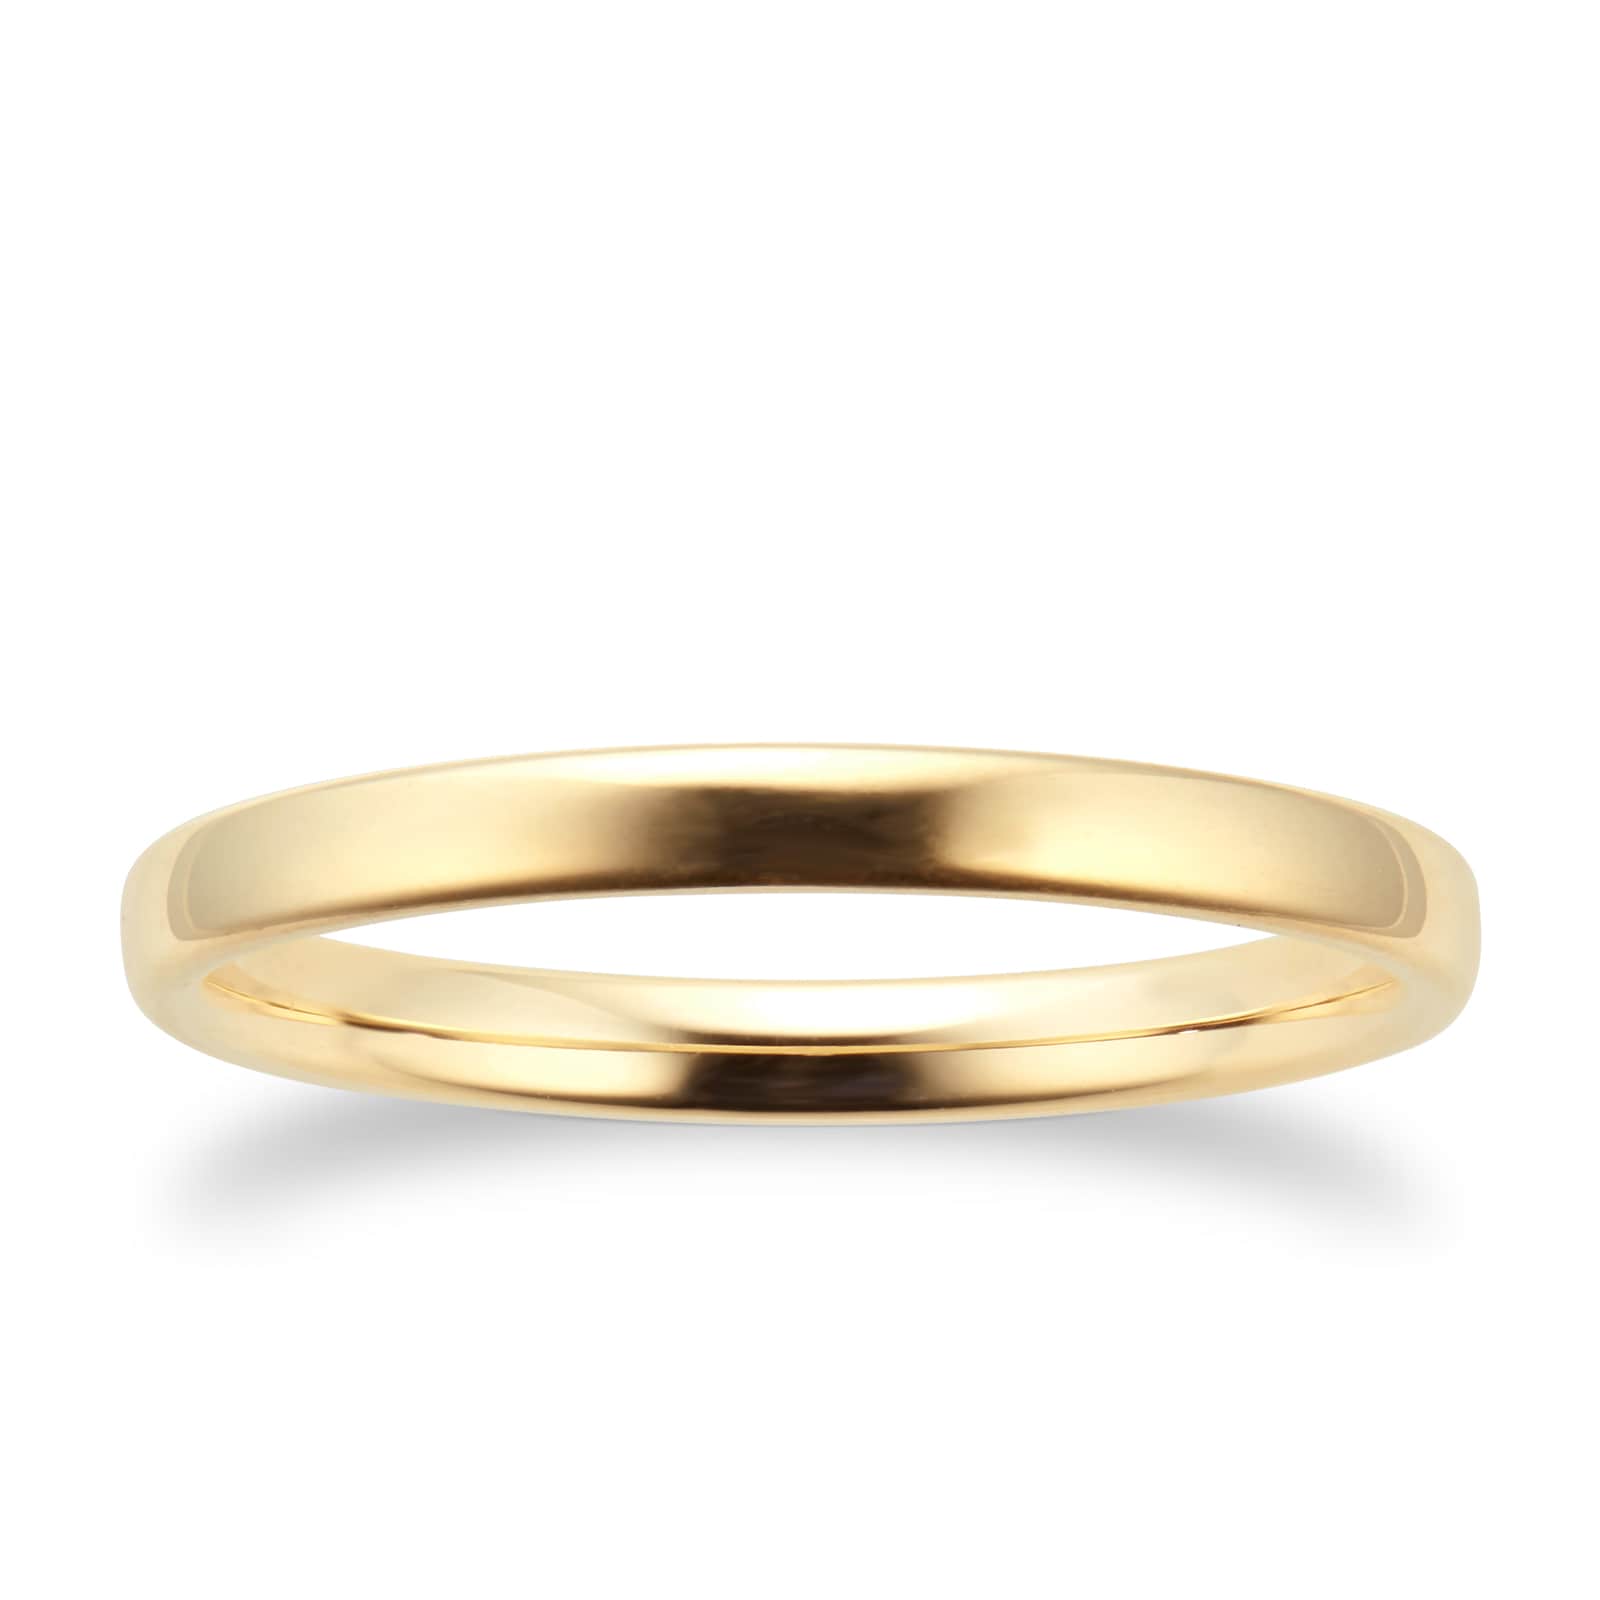 2mm Slight Court Standard Wedding Ring In 9 Carat Yellow Gold Ring Size I5